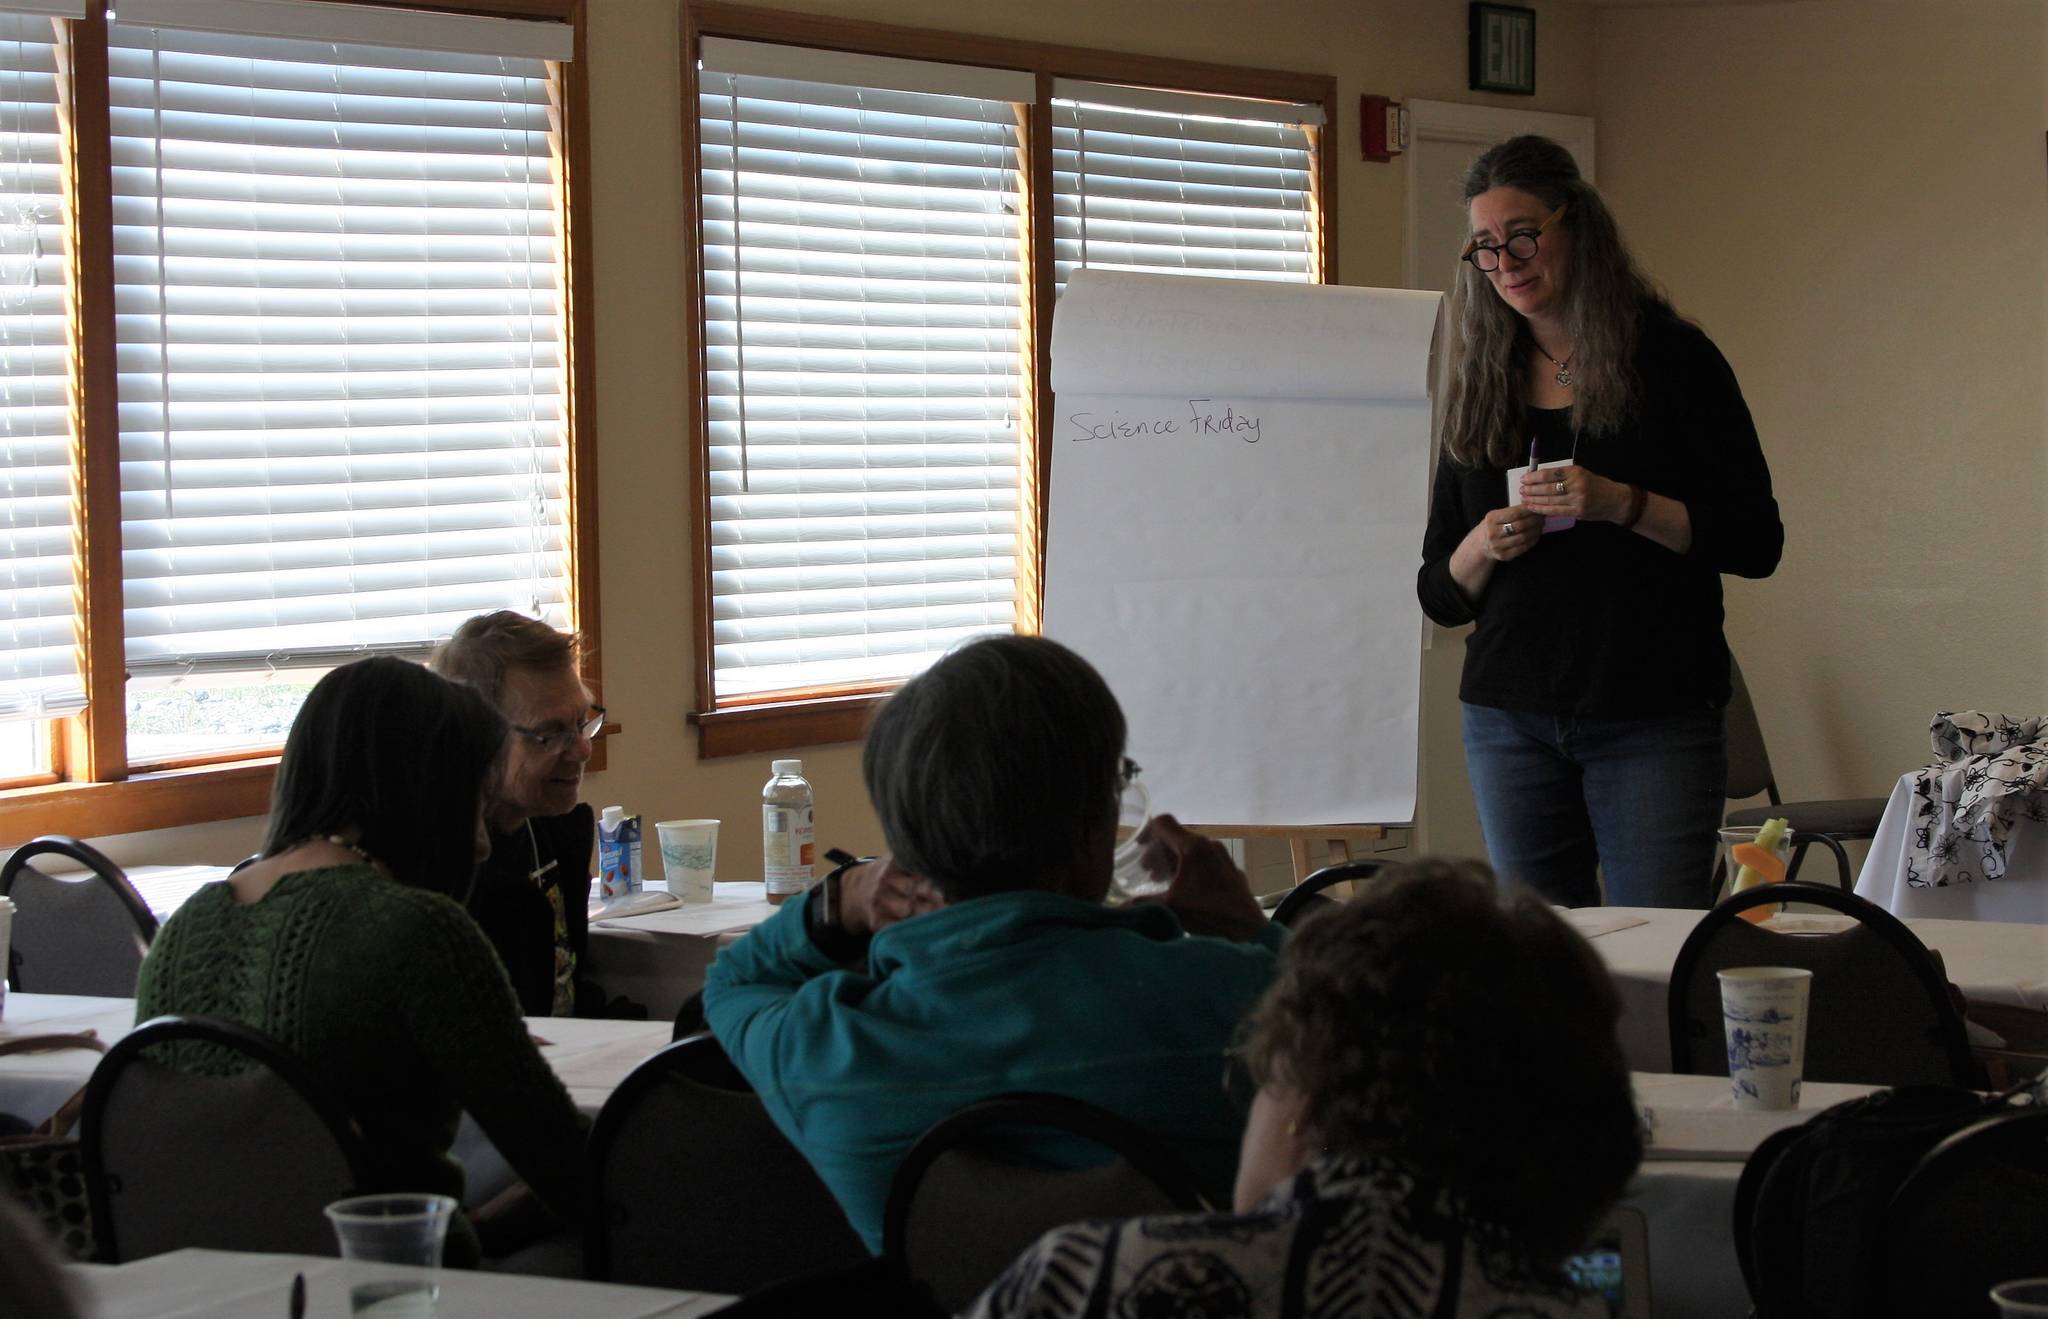 Resident poet Erin Coughlin Hollowell presents a unique seminar on science poems during her workshop, “Yoked: How Poems of Science Pull Twice the Load”, on Sunday, June 10, 2018 at the Kachemak Bay Writers’ Conference at Land’s End Resort in Homer, Alaska. (Photo by Delcenia Cosman)